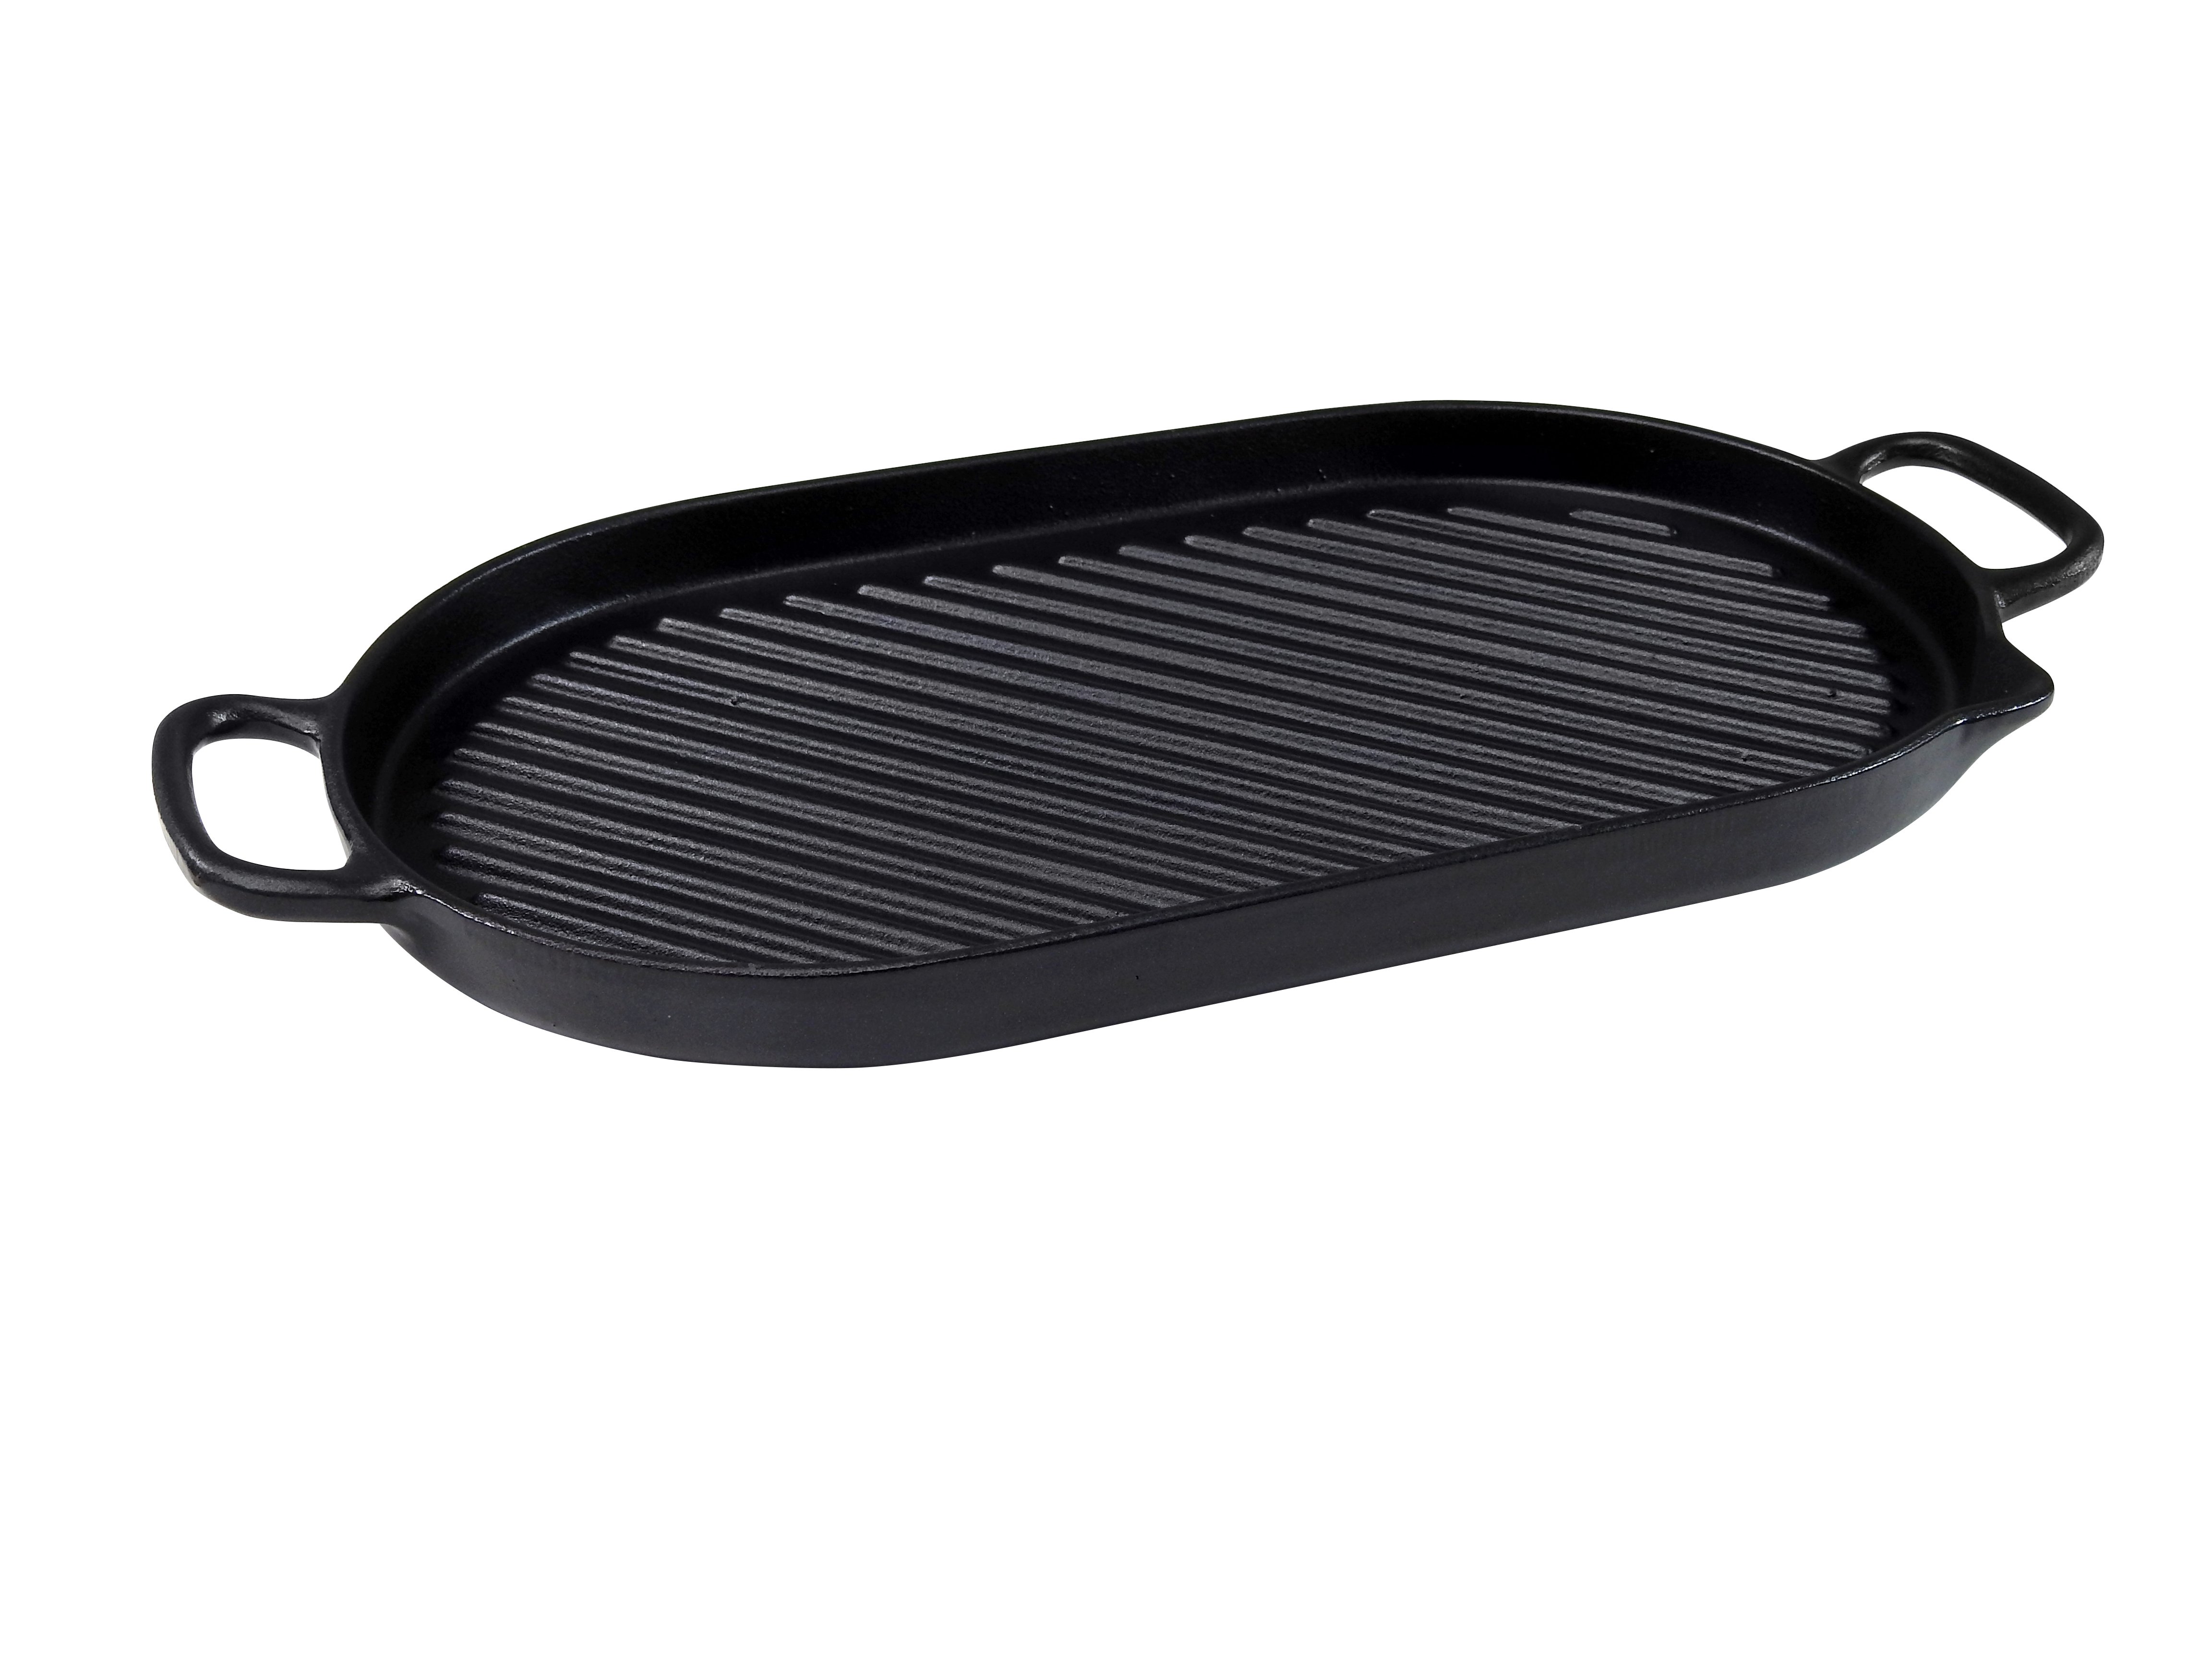 CHASS GIANT GRILL ONYX BLK 42cm